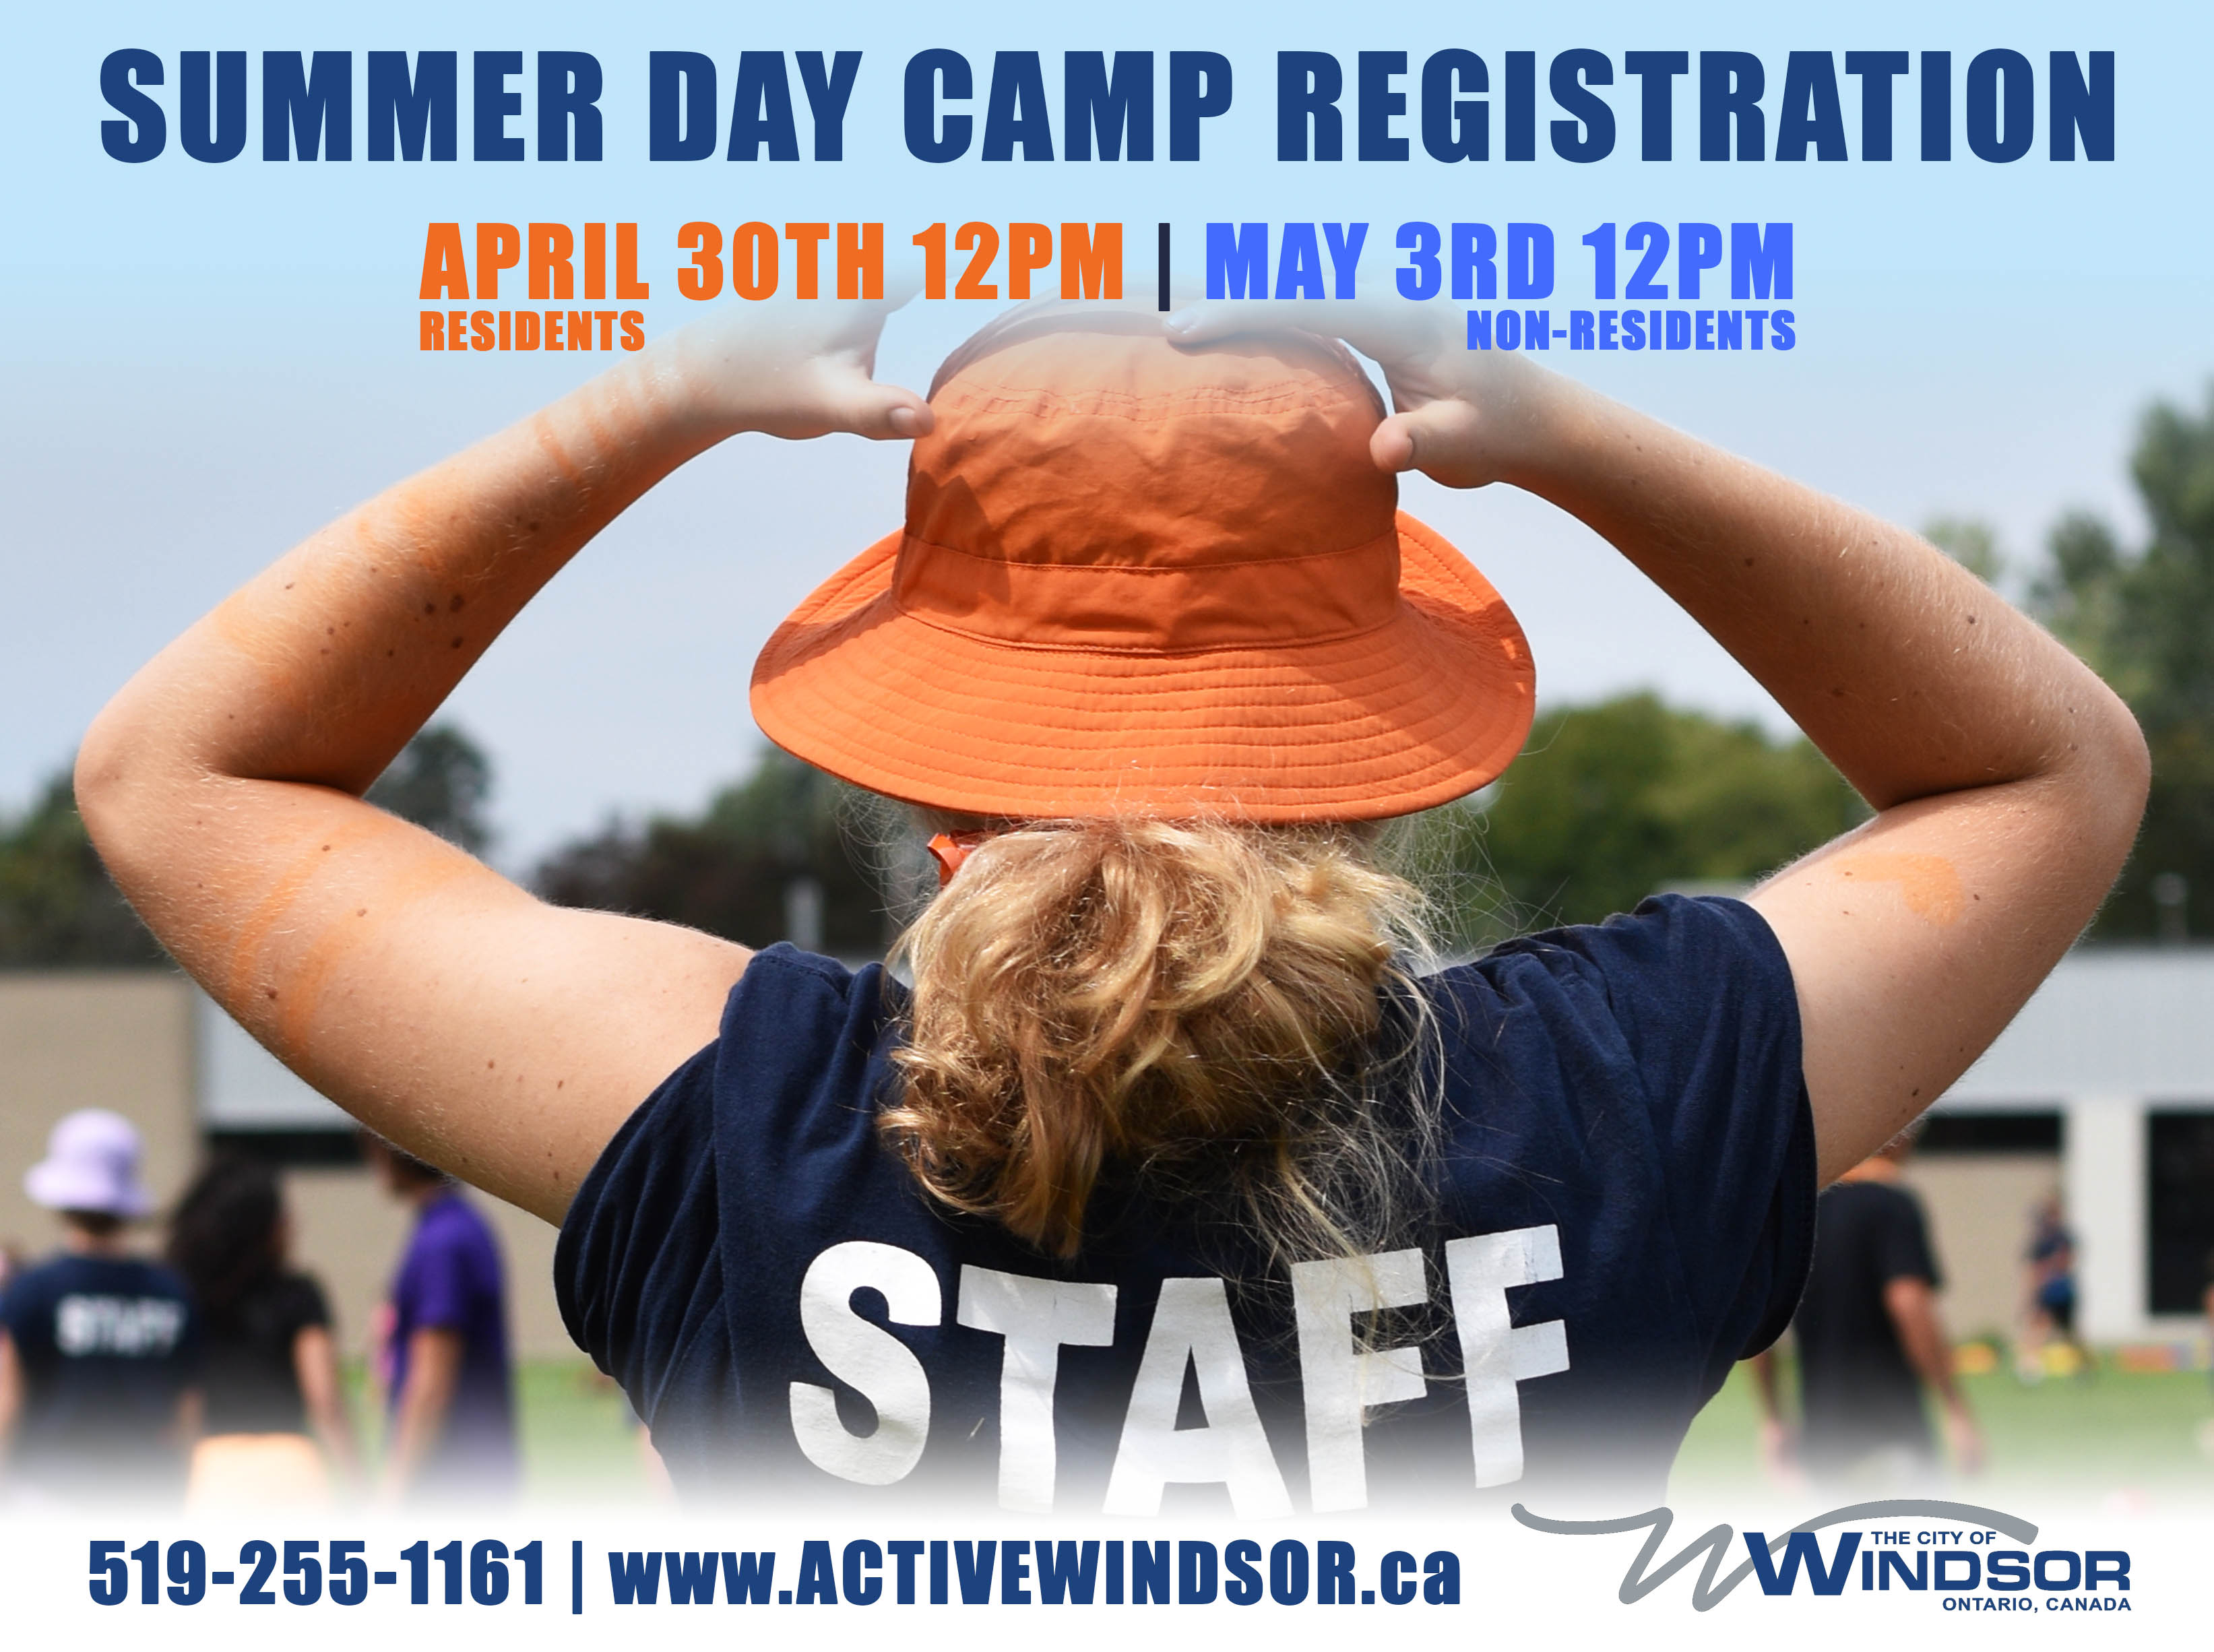 Day camp staff putting their hands on their head. Text reads Summer Day Camp Registration April 30th 12pm for residents, May 3rd 12pm for non-residents. 519-255-1161, www.ActiveWindsor.ca. The City of Windsor logo in bottom right corner.